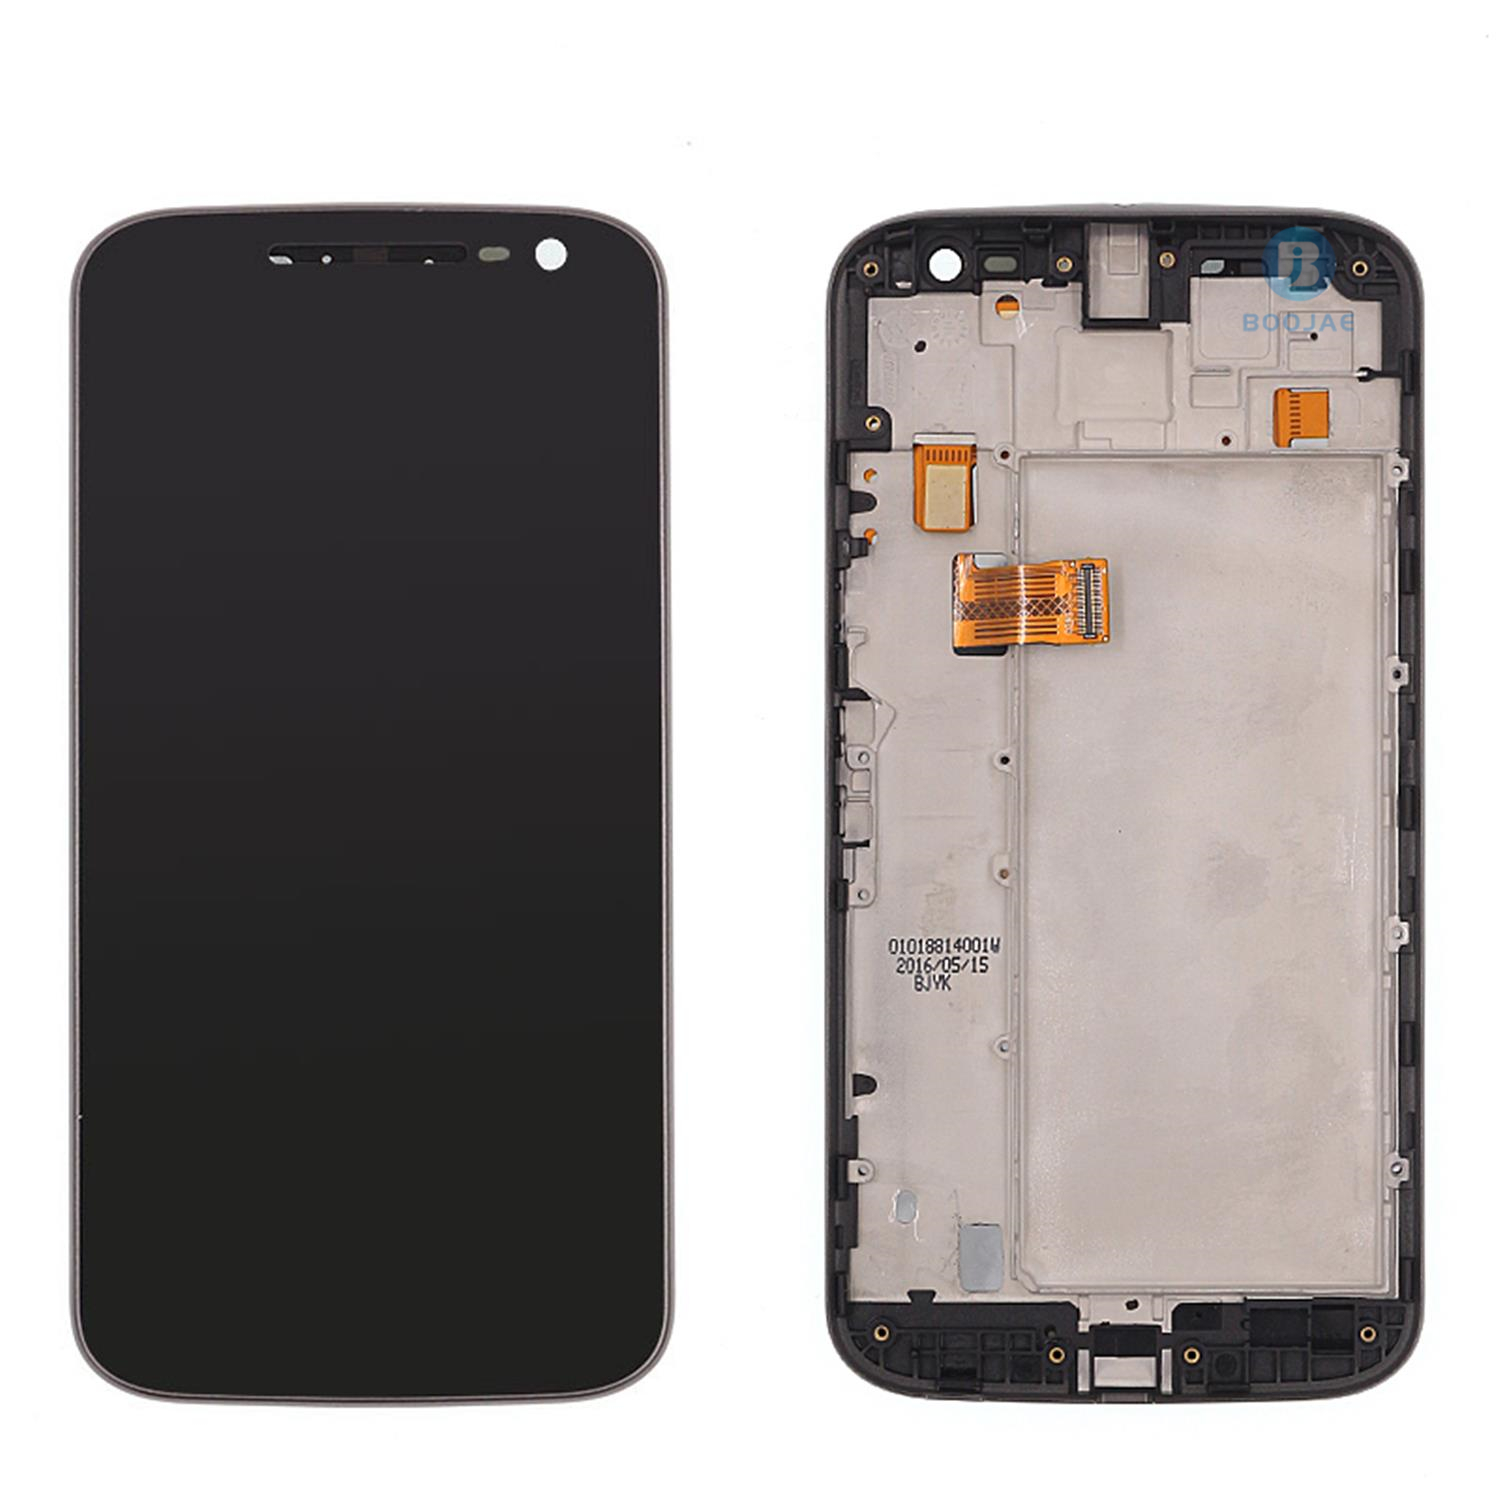 For Motorola Moto G4 LCD Screen Display and Touch Panel Digitizer Assembly Replacement